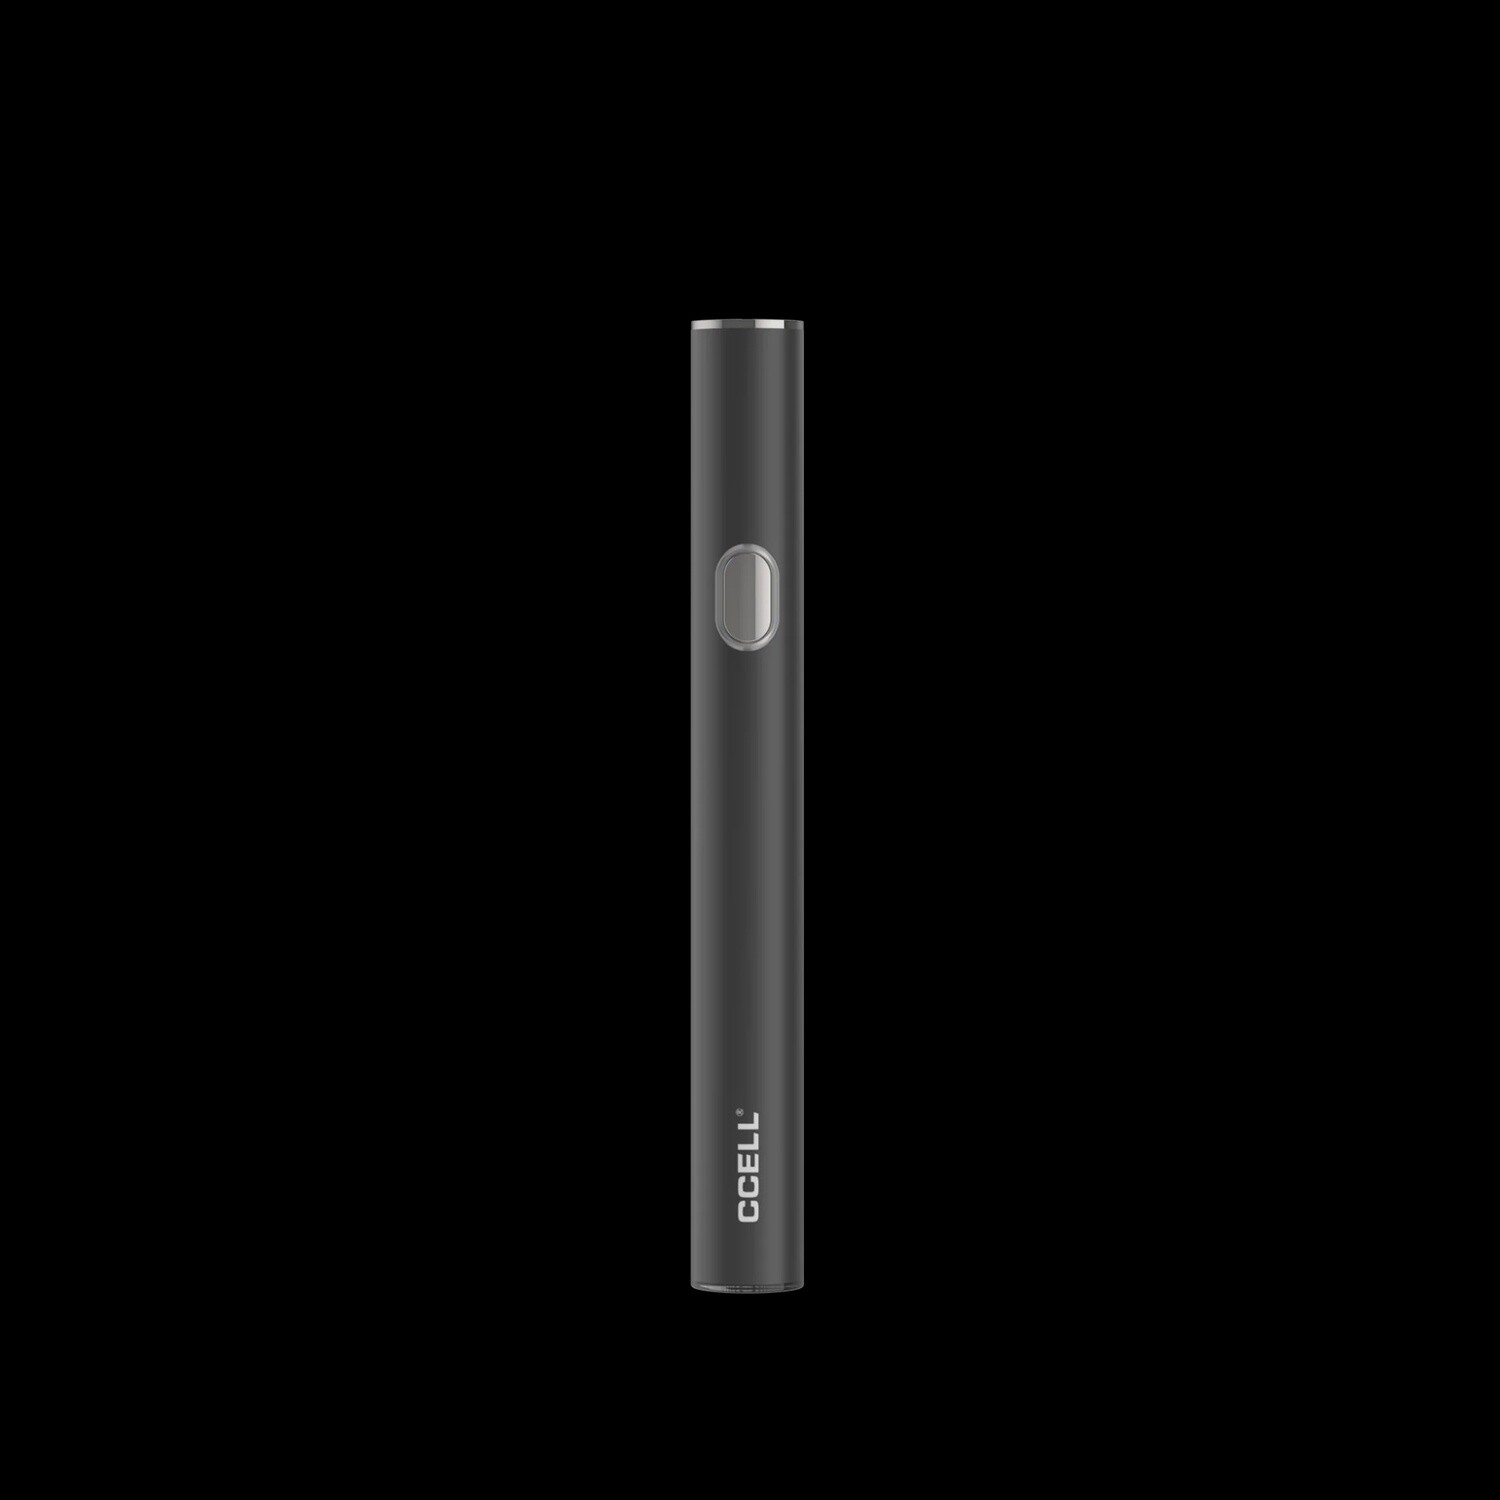 CCELL M3b Pro 510 Battery